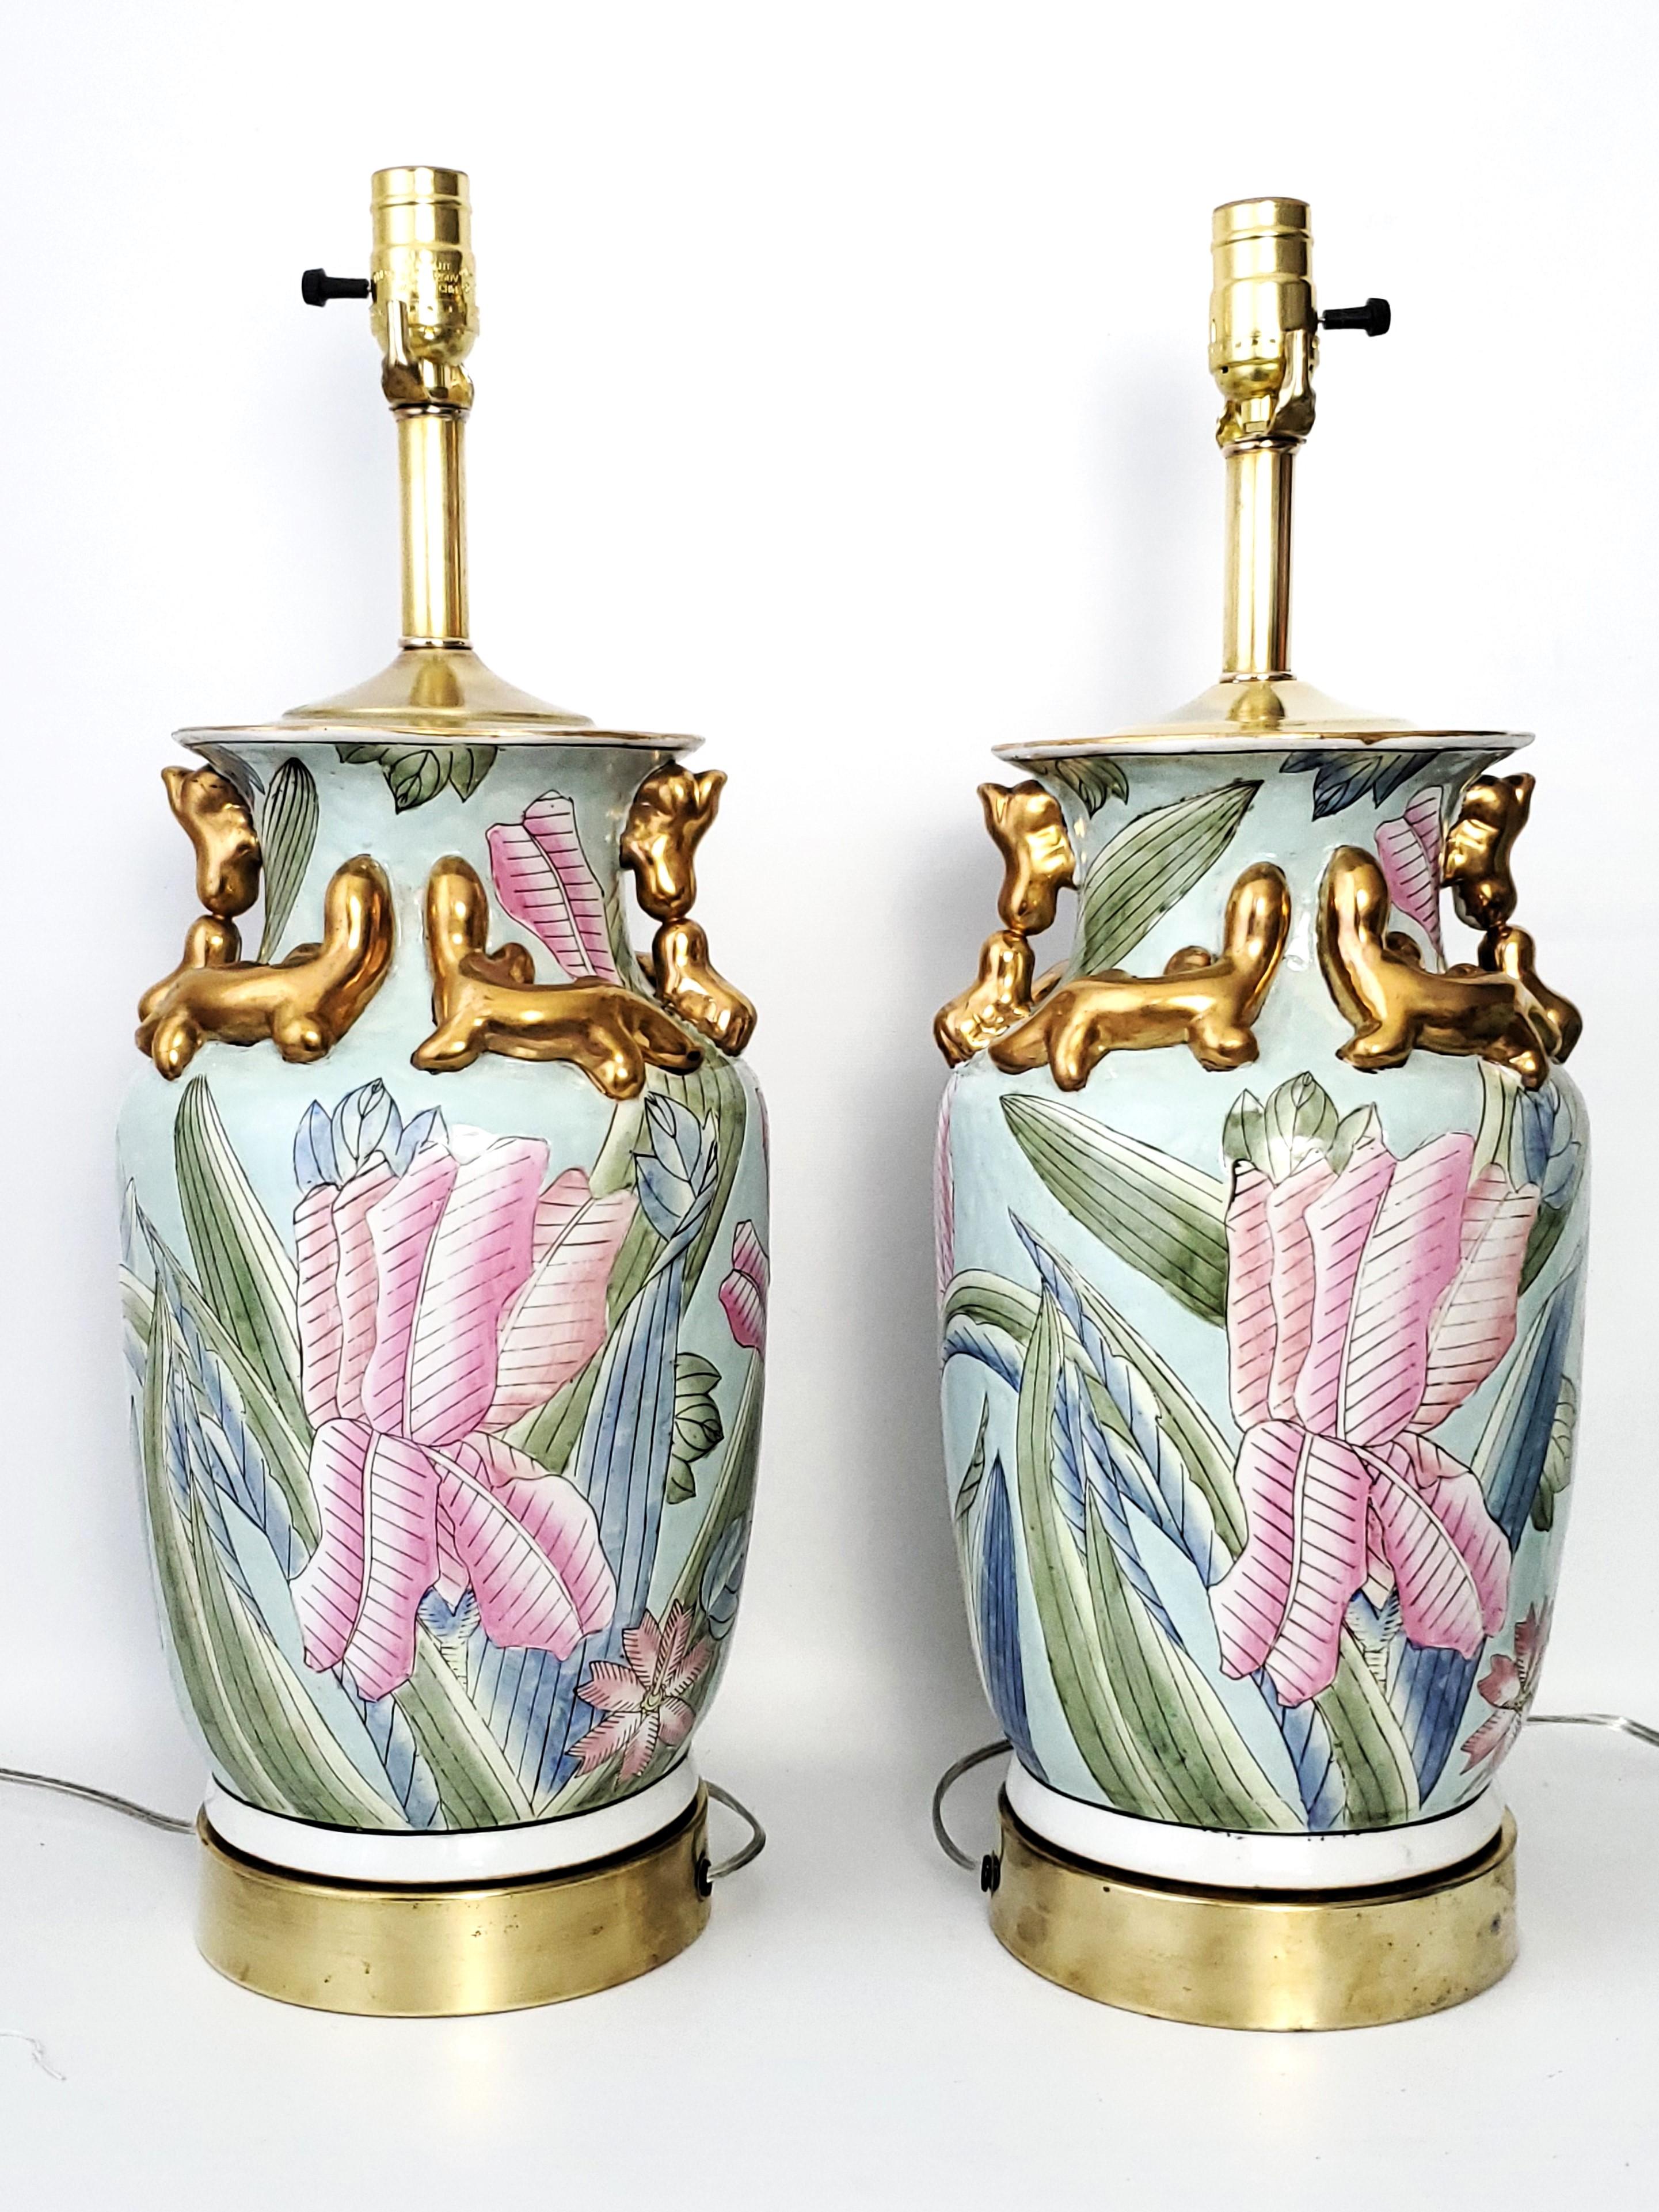 Vintage Chinese Porcelain Pastel Tobacco Leaf Table Lamps with Turquoise Shades In Good Condition For Sale In Miami, FL